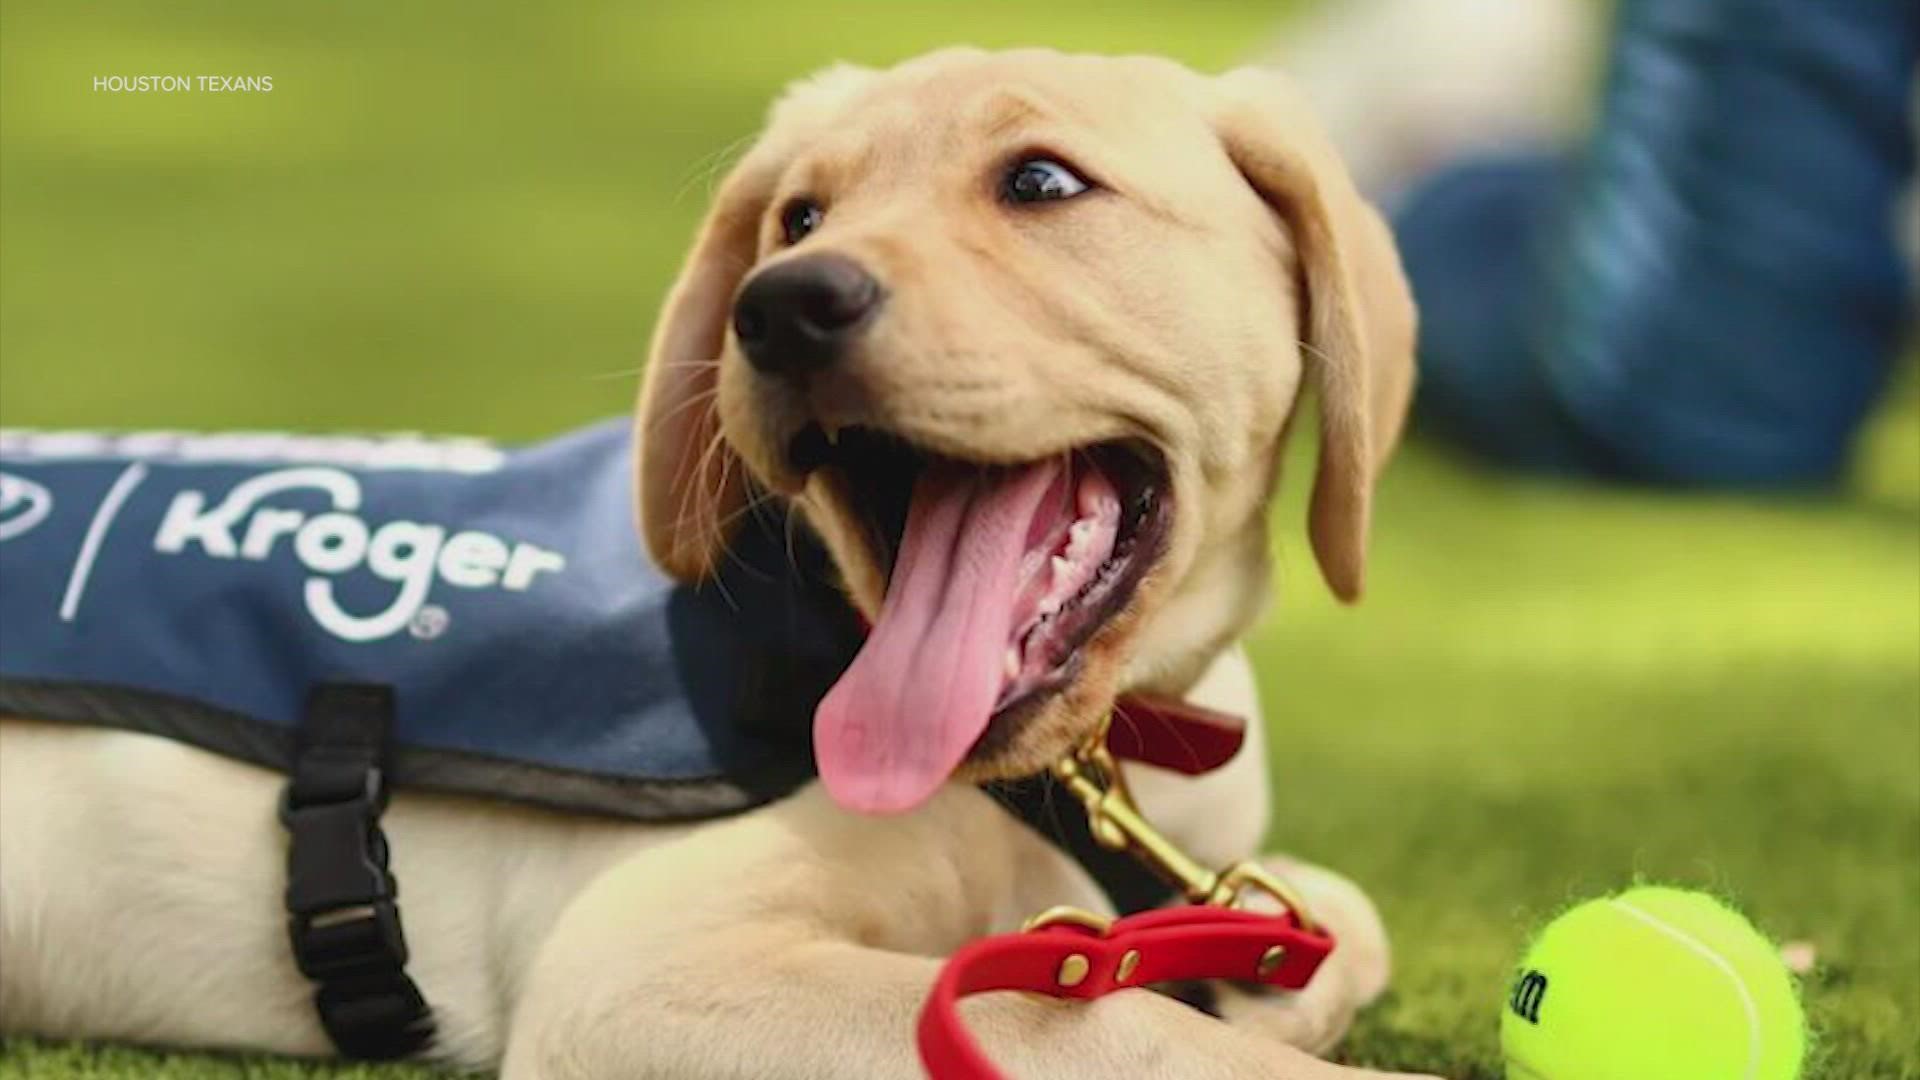 The Texans pup, Kirby, was selected to compete in this year's Puppy Bowl, which celebrates adoptable dogs and showcases animal shelters throughout the U.S.